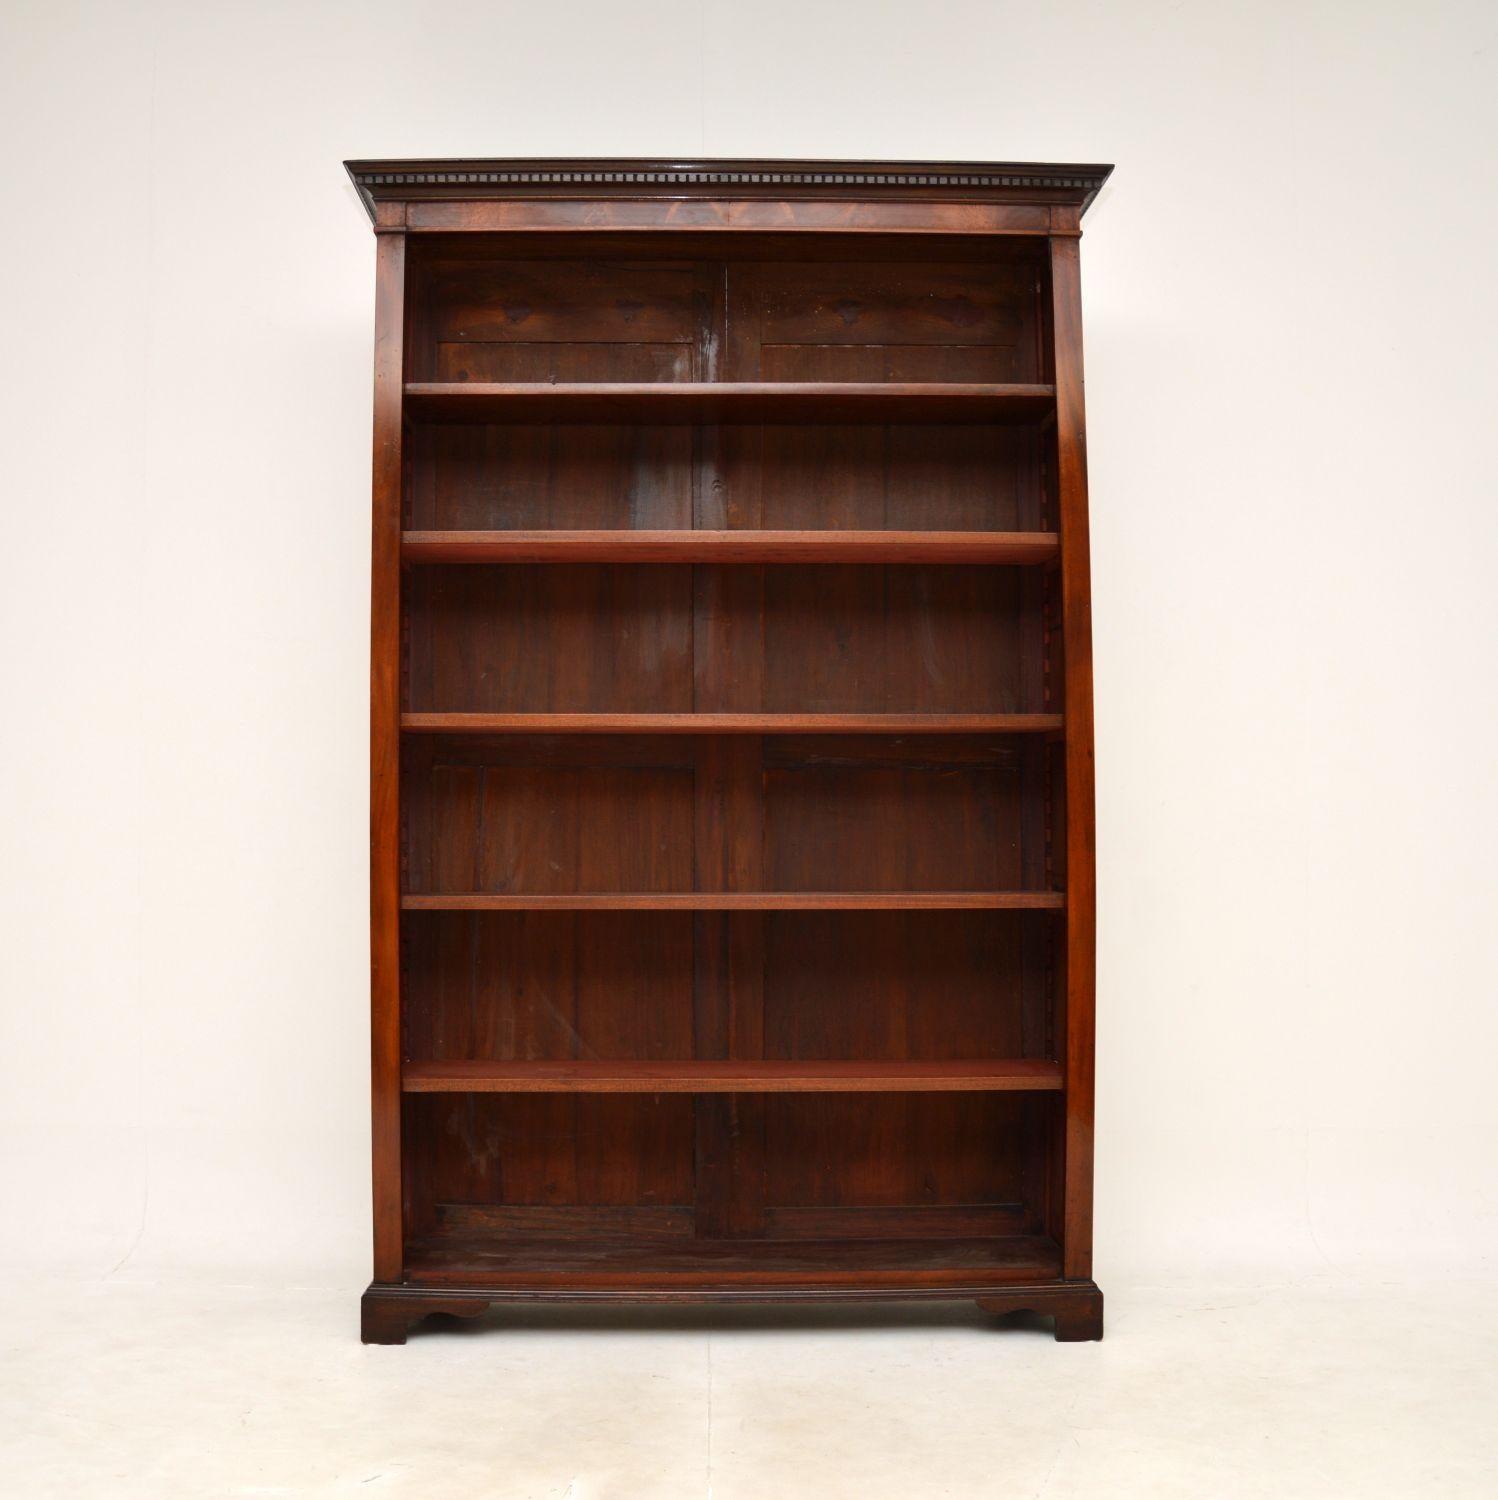 A large and impressive antique open bookcase. This was made in England, we would date it from around the 1890-1910 period.

It is of very fine quality, with five adjustable shelves offering lots of storage space. This has a lovely dental moulded